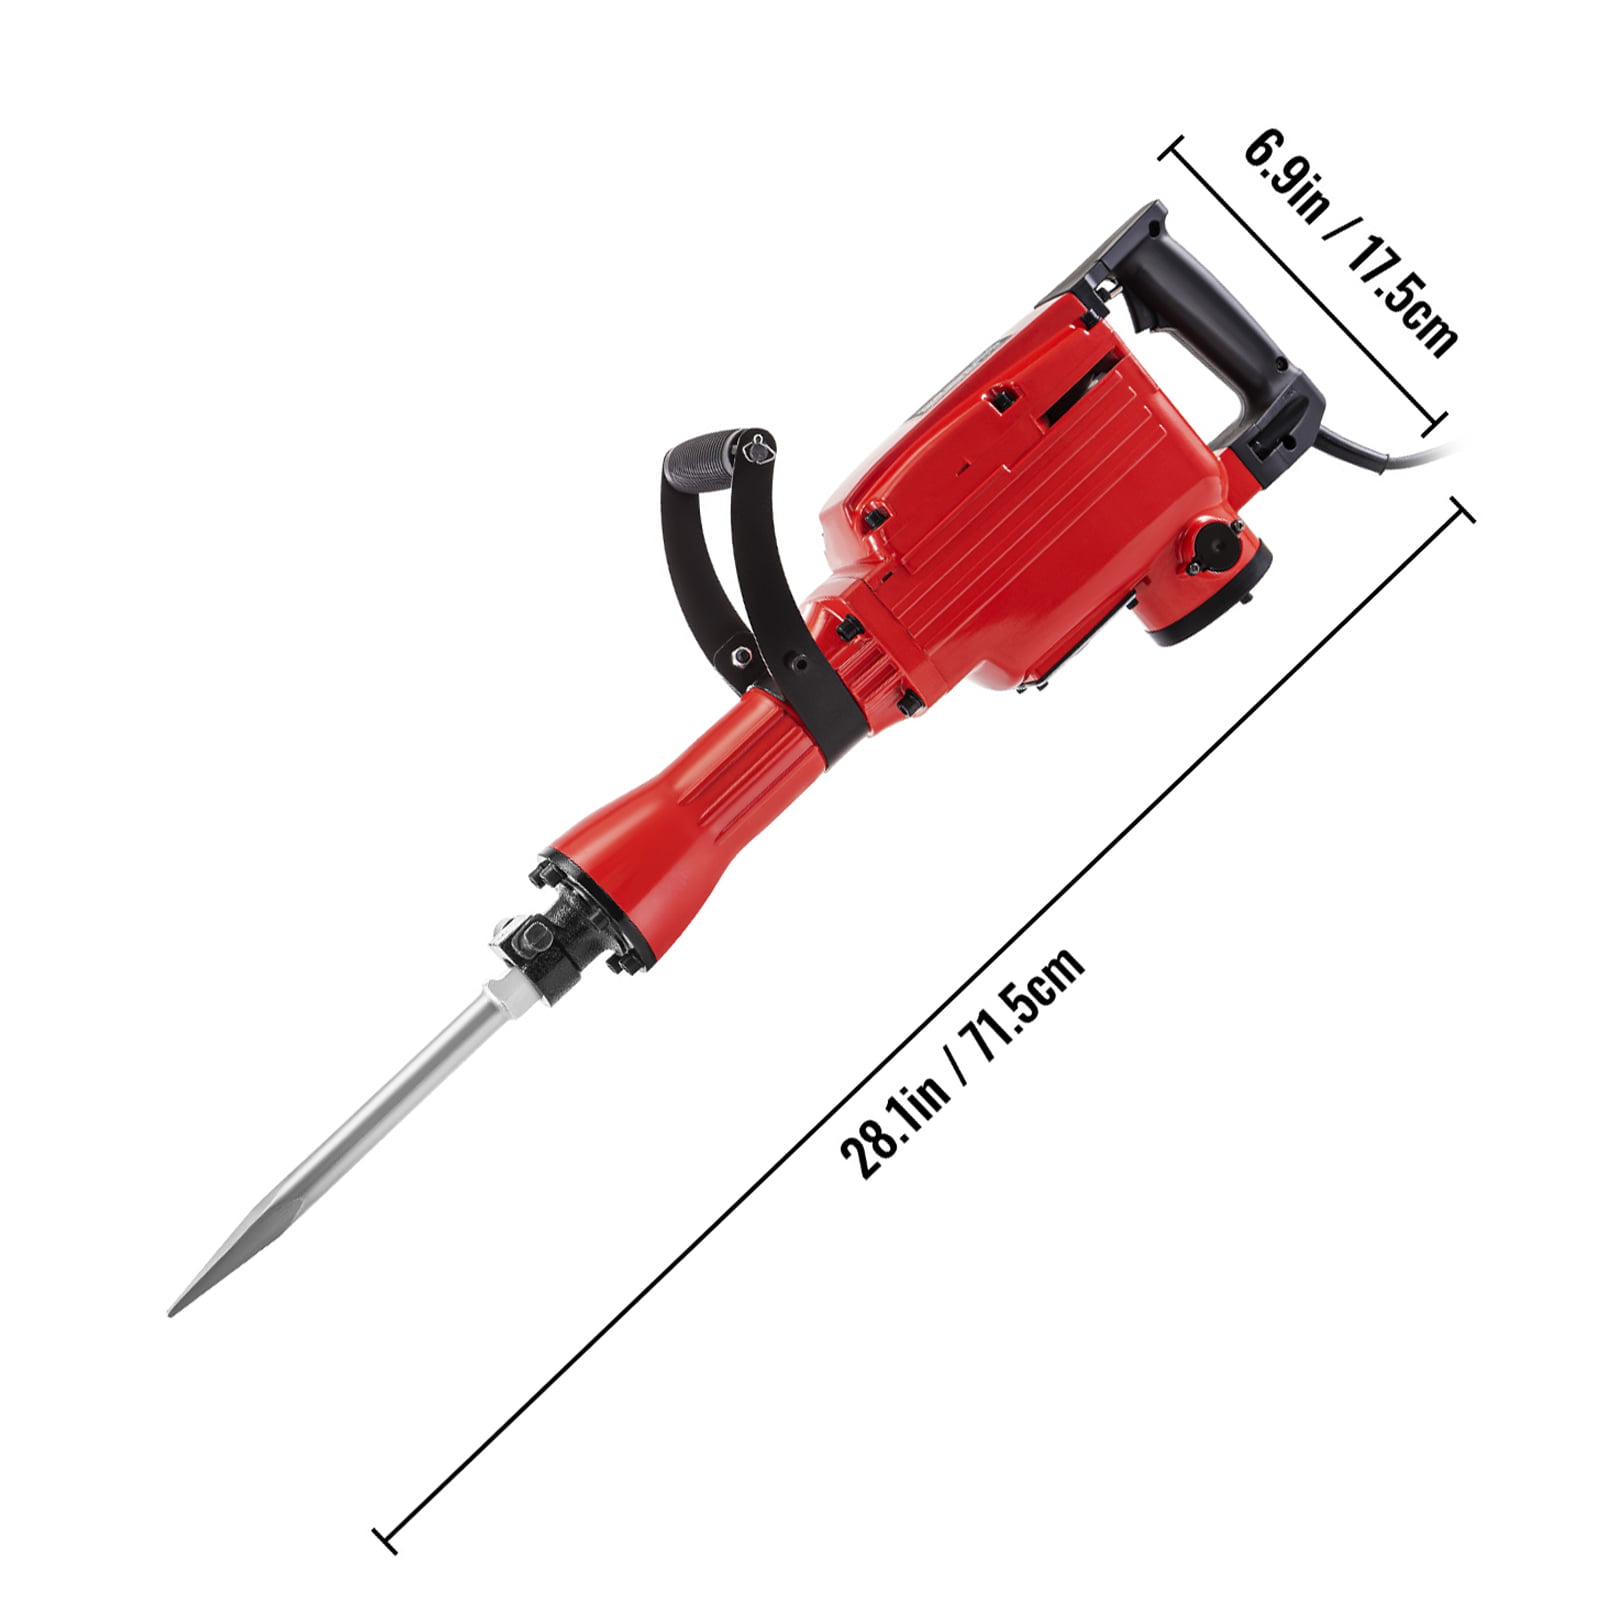 Demolition Hammer 1-1/2 In SDS Chisels Rotary Drill Jack Concrete Breaker Punch 